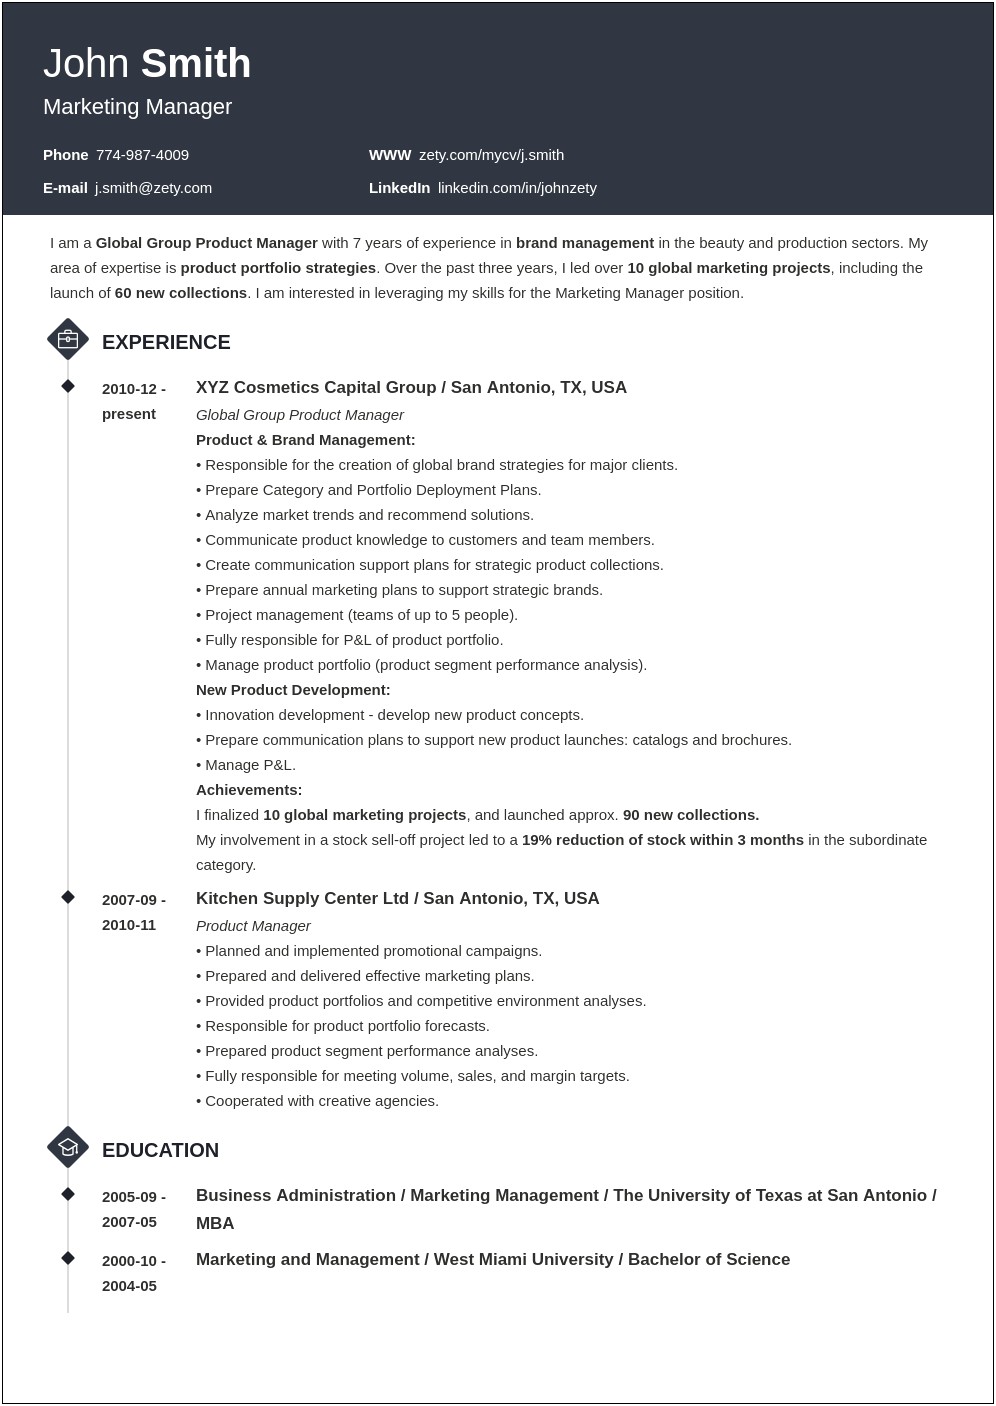 Resume Work History Or Education First